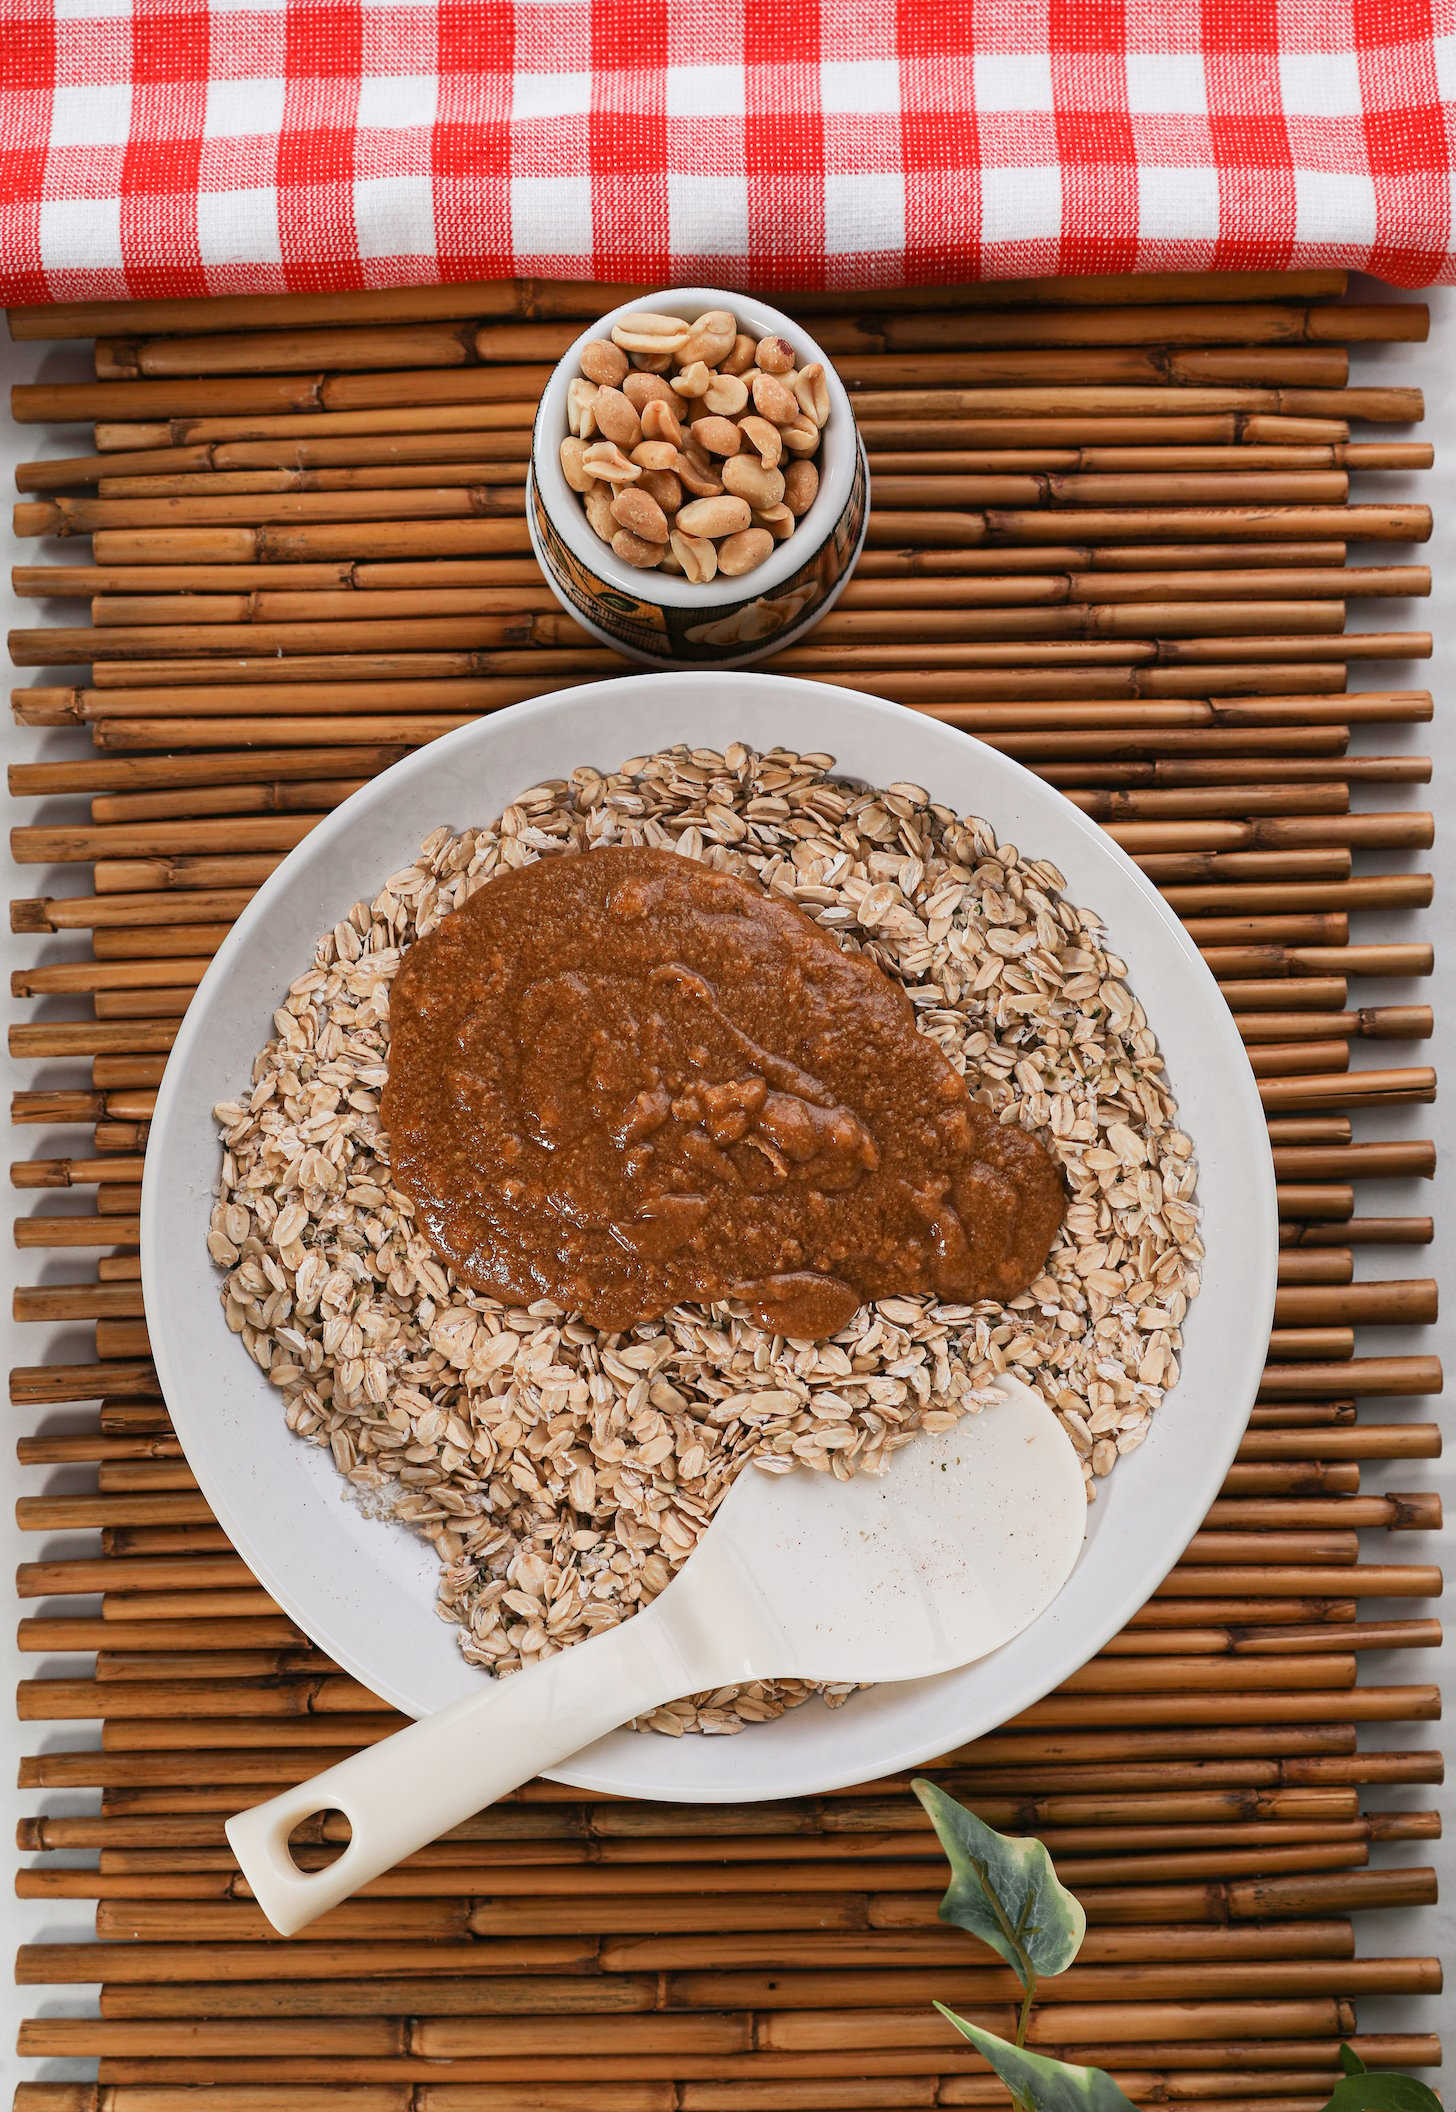 A bowl of rolled oats topped with a thick brown sauce with a ramekin of peanuts on the side.